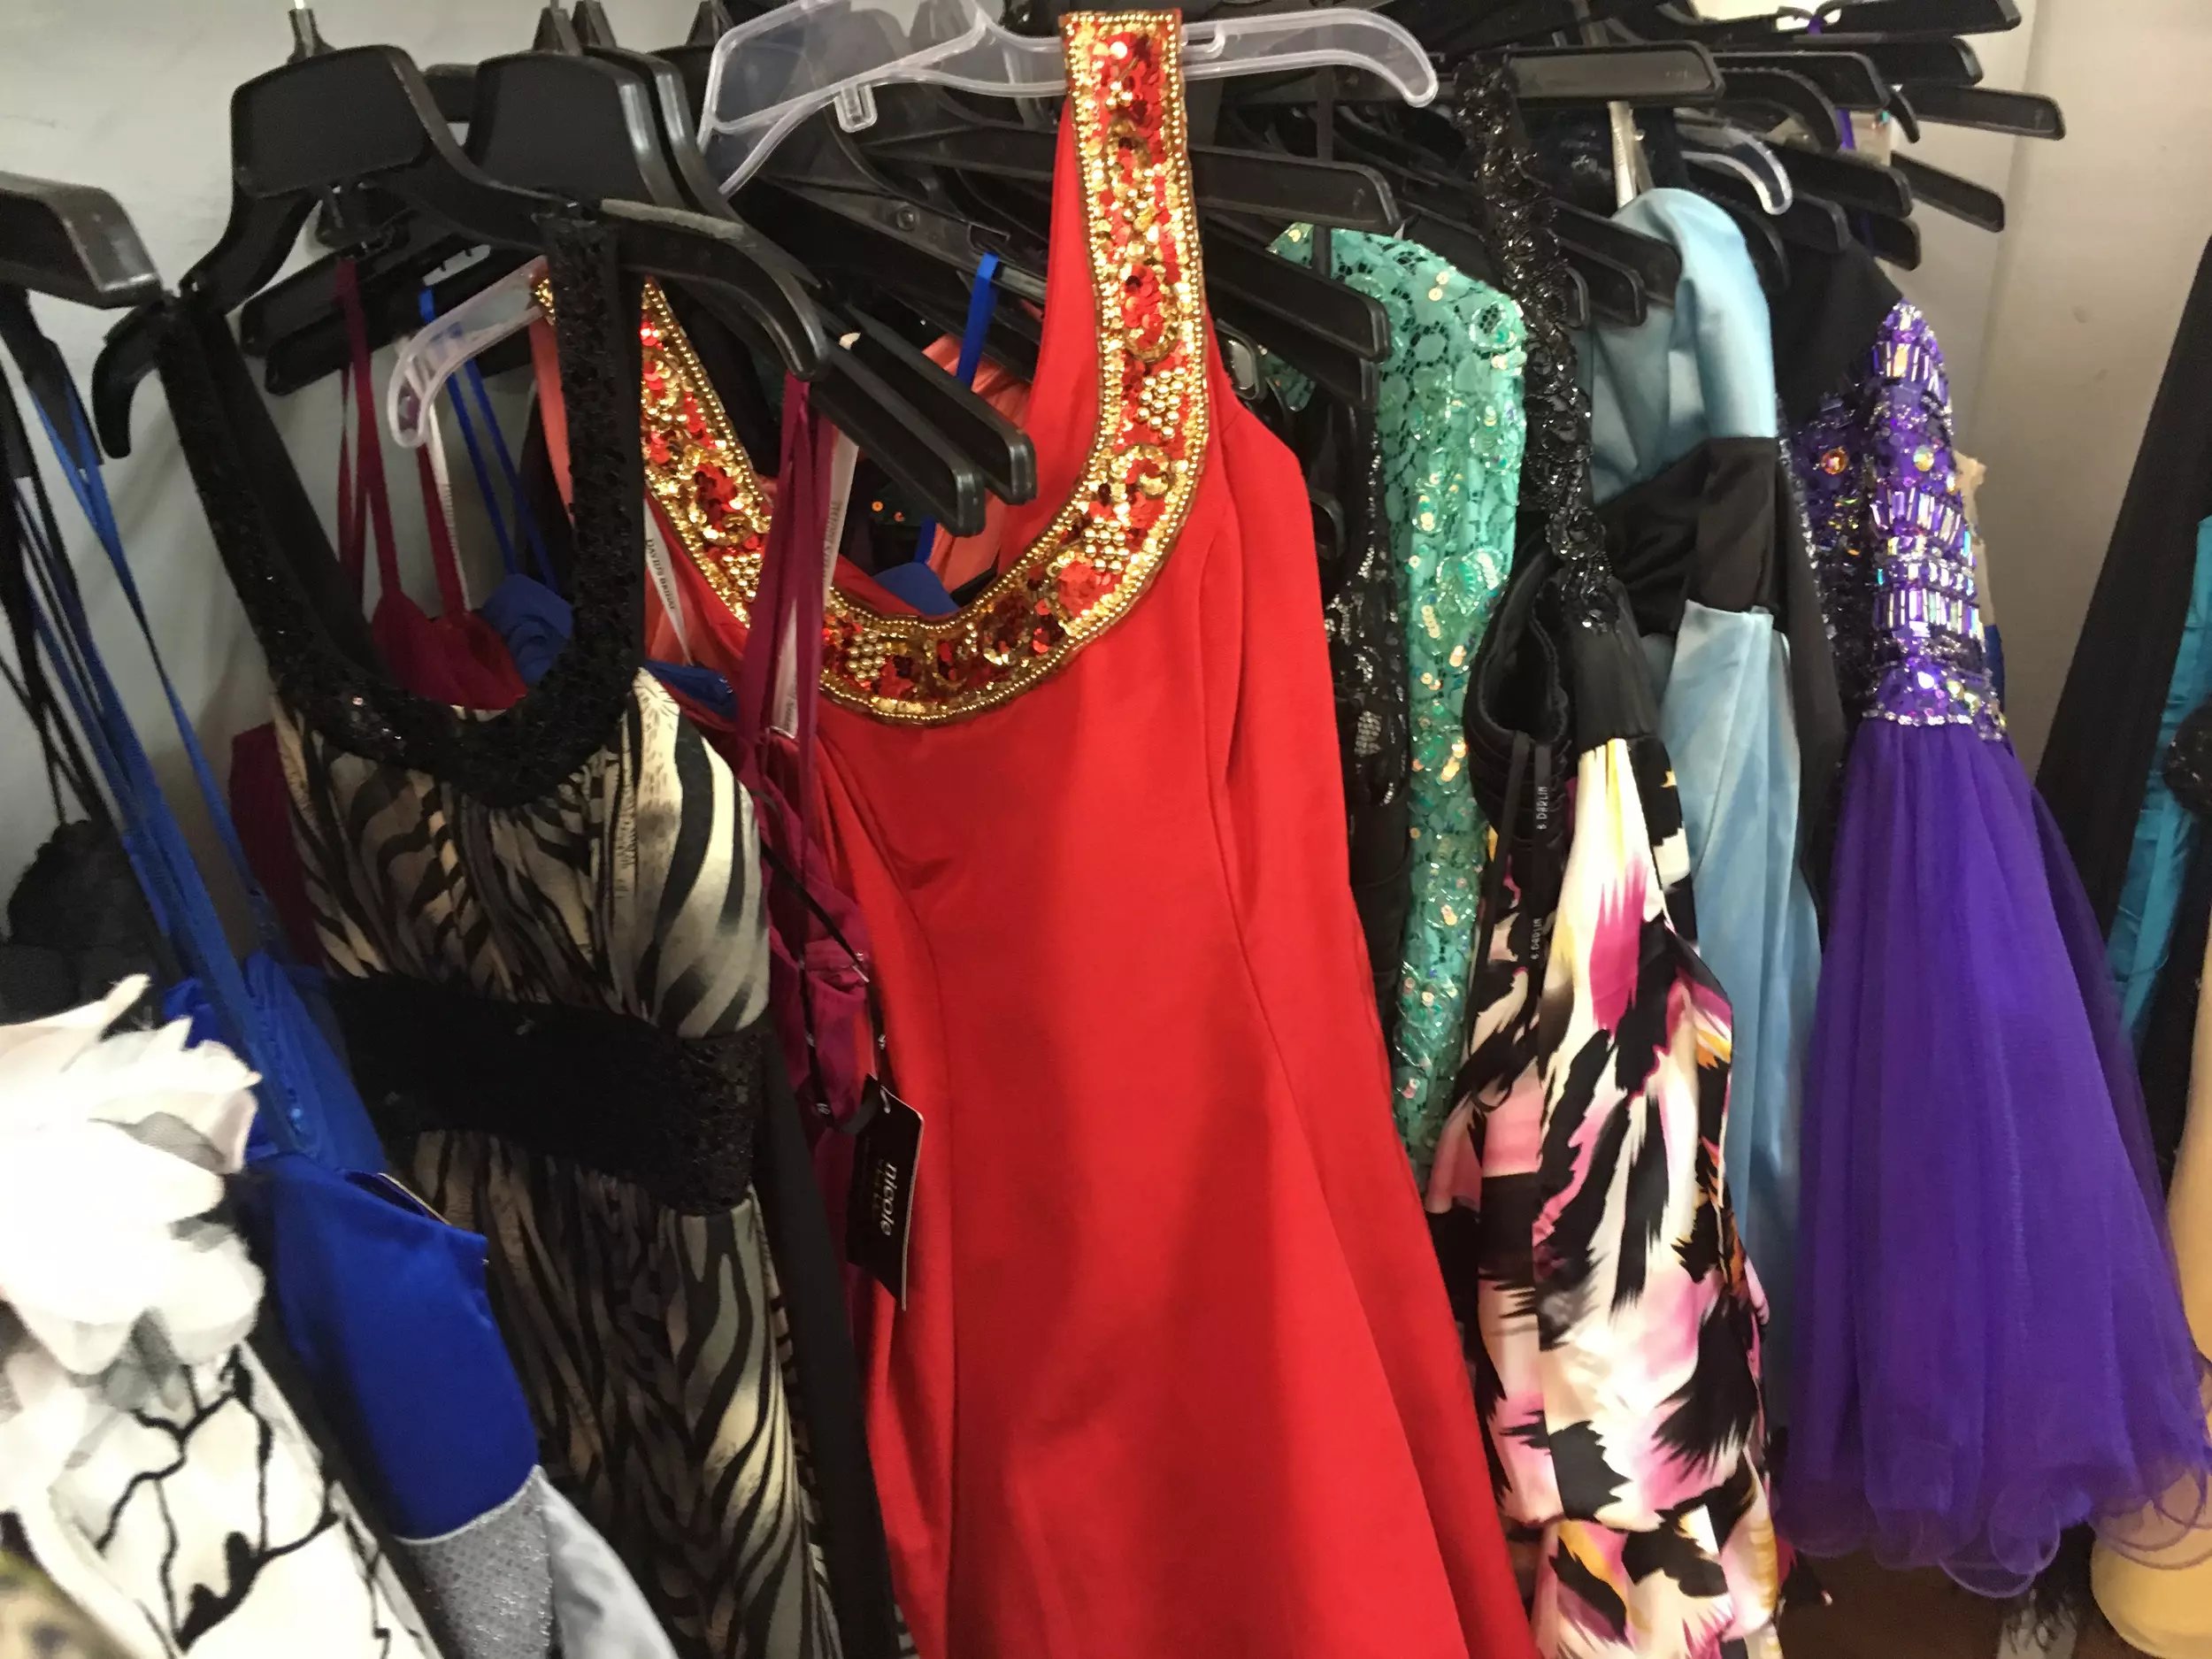 Where to Find a Nice Second-Hand Prom Dress Around Evansville